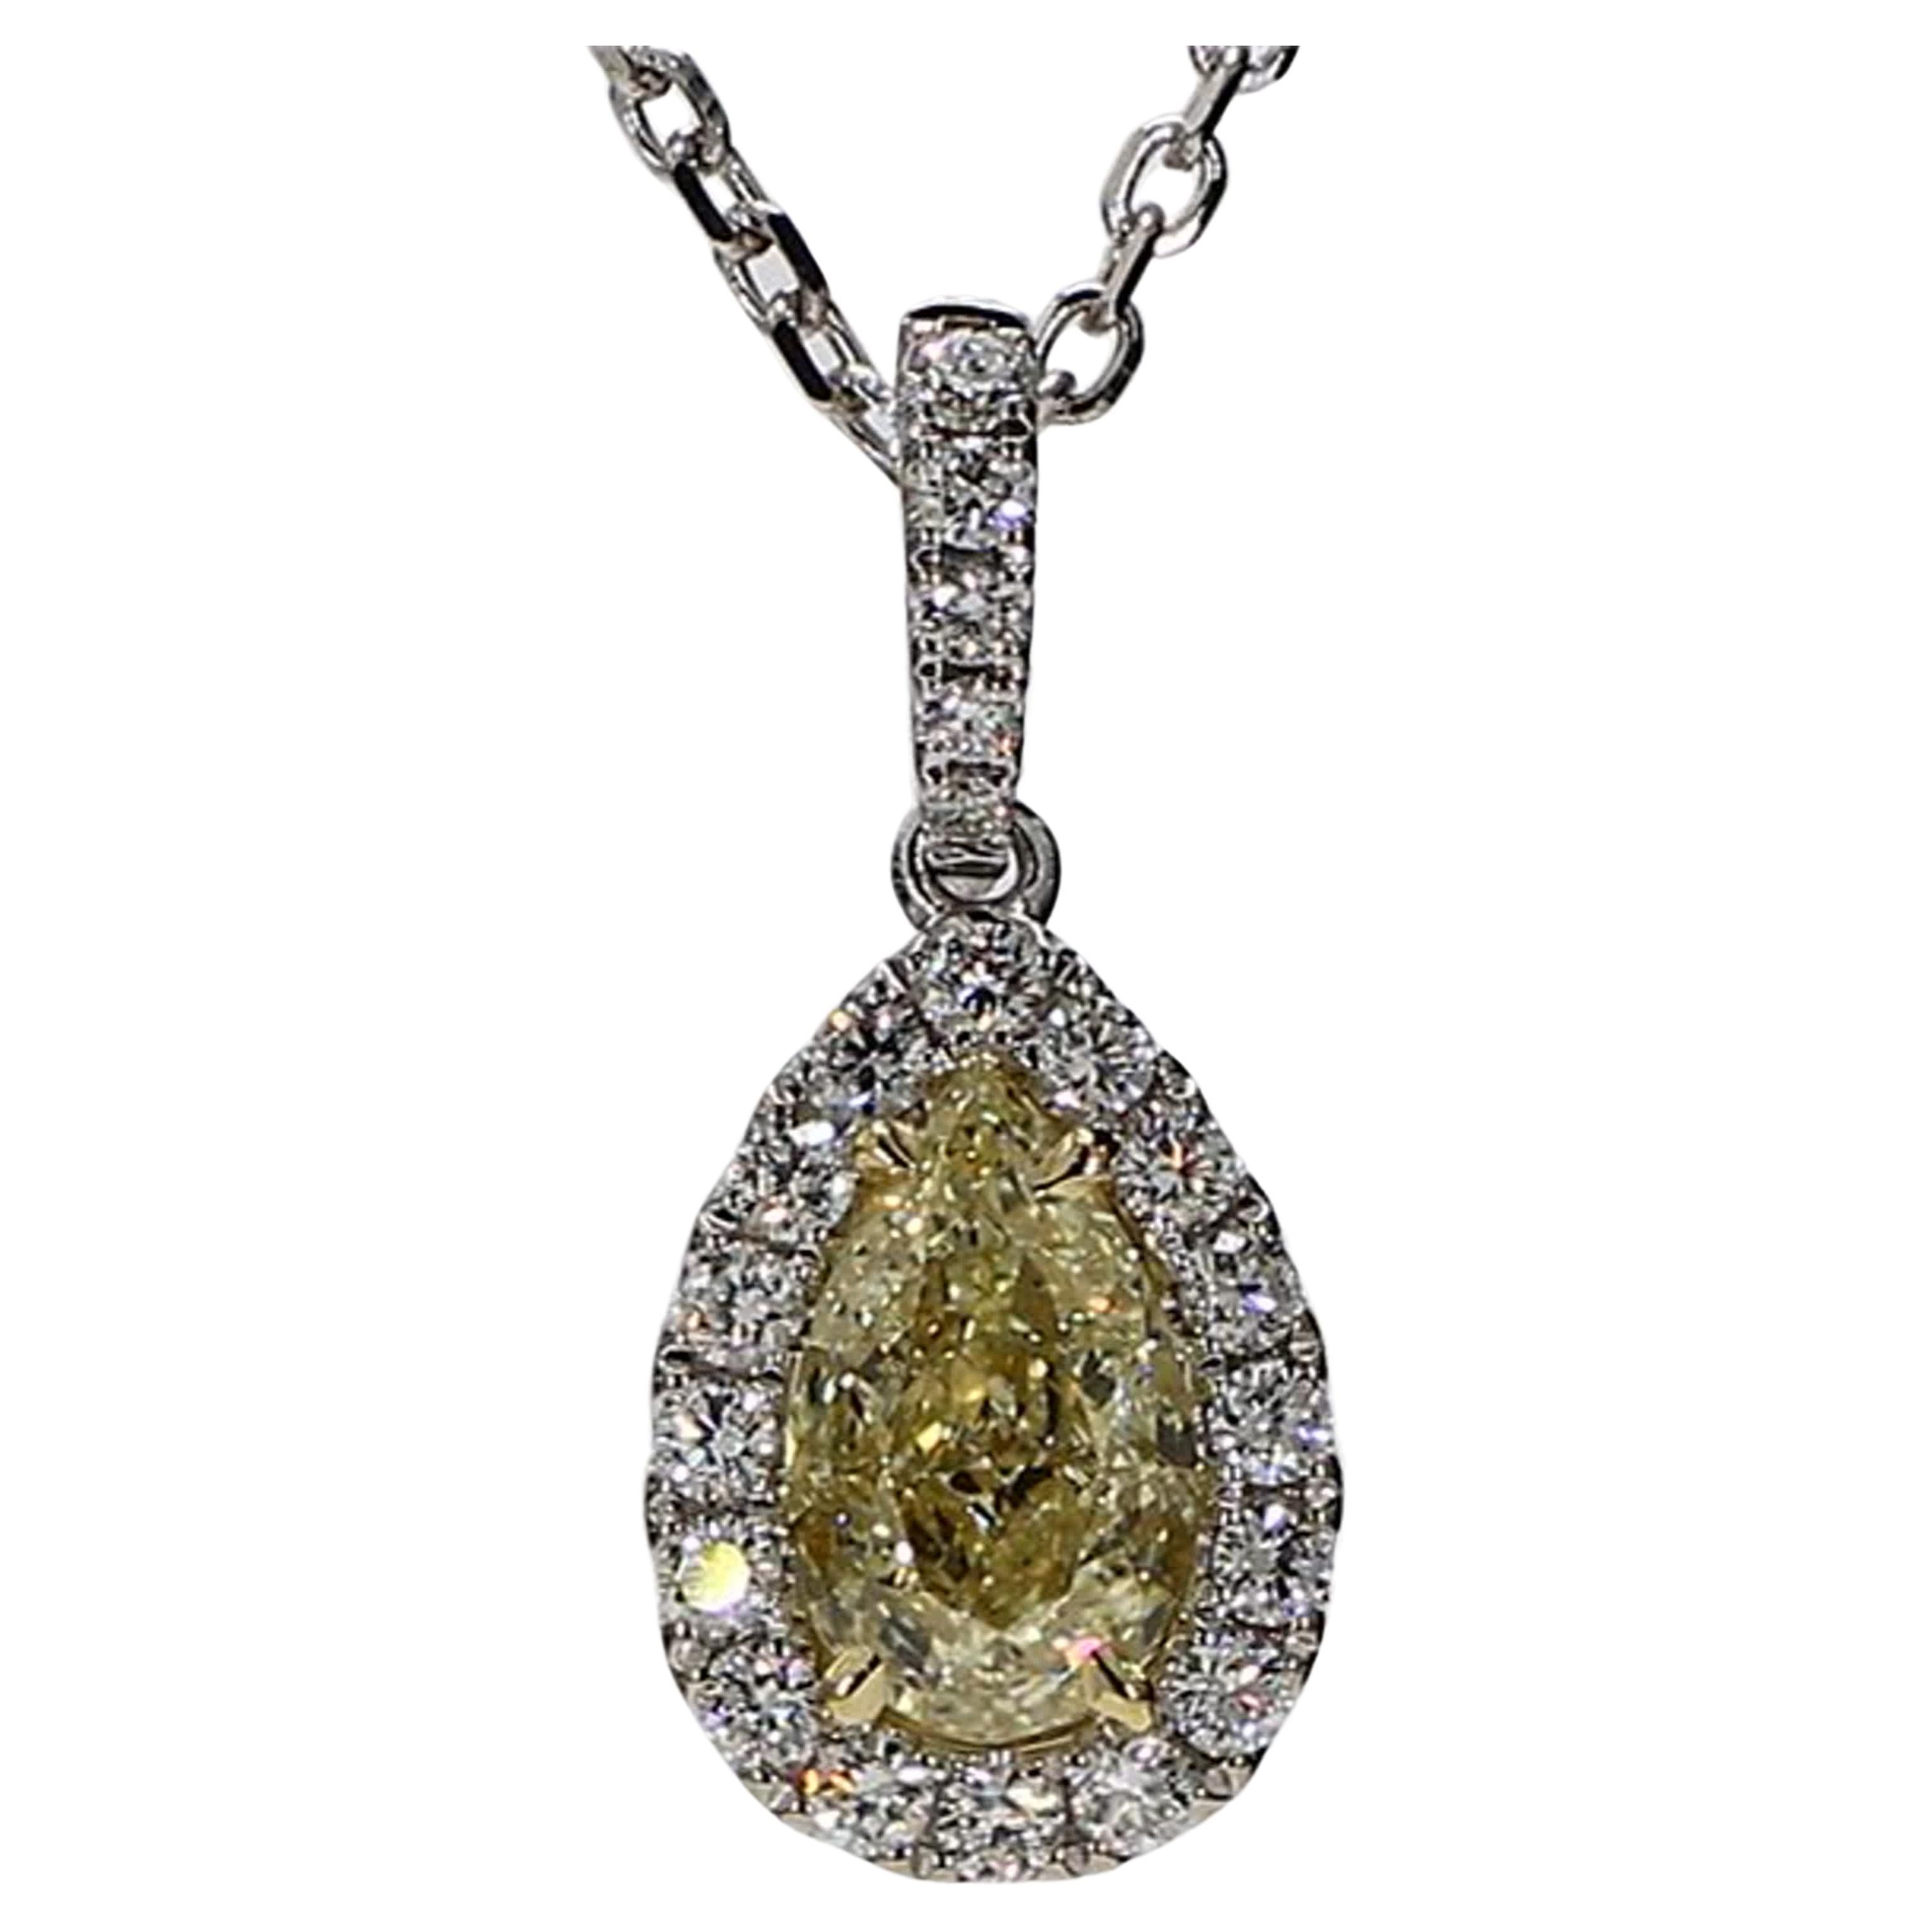 GIA Certified Natural Yellow Pear and White Diamond 1.32 Carat TW Gold Pendant